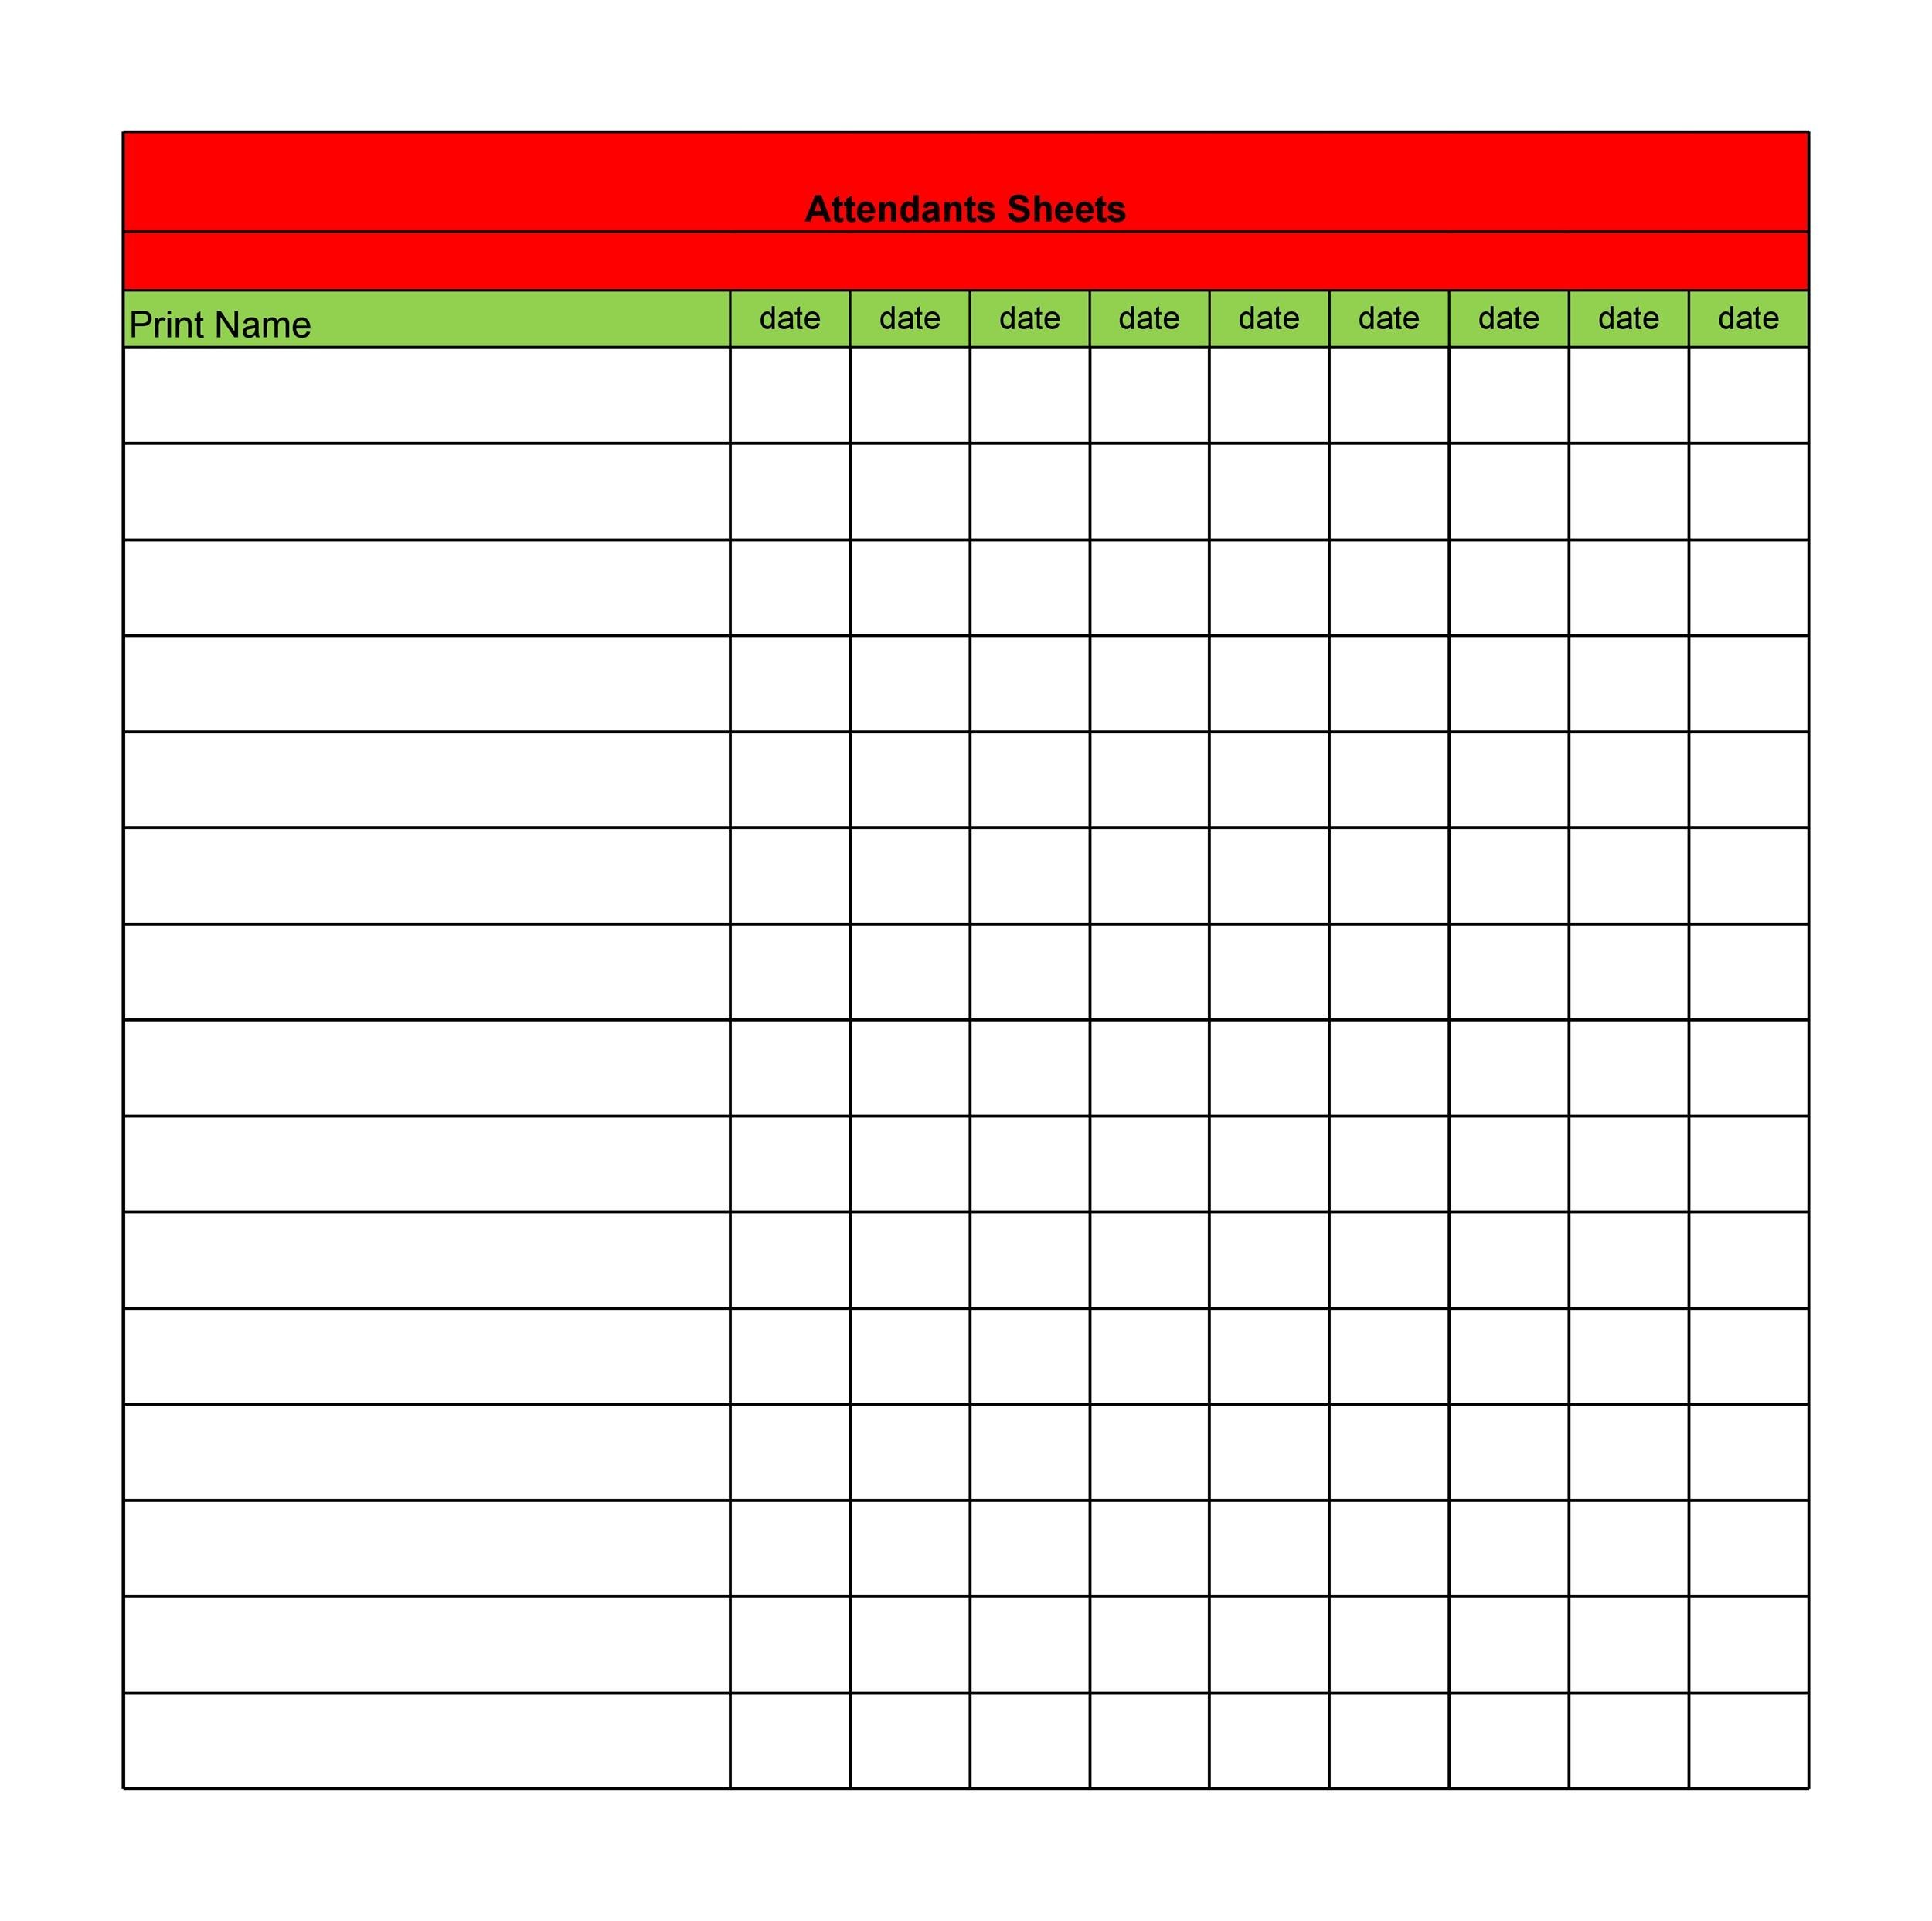 homeschool-attendance-record-printable-attendance-record-etsy-in-2020